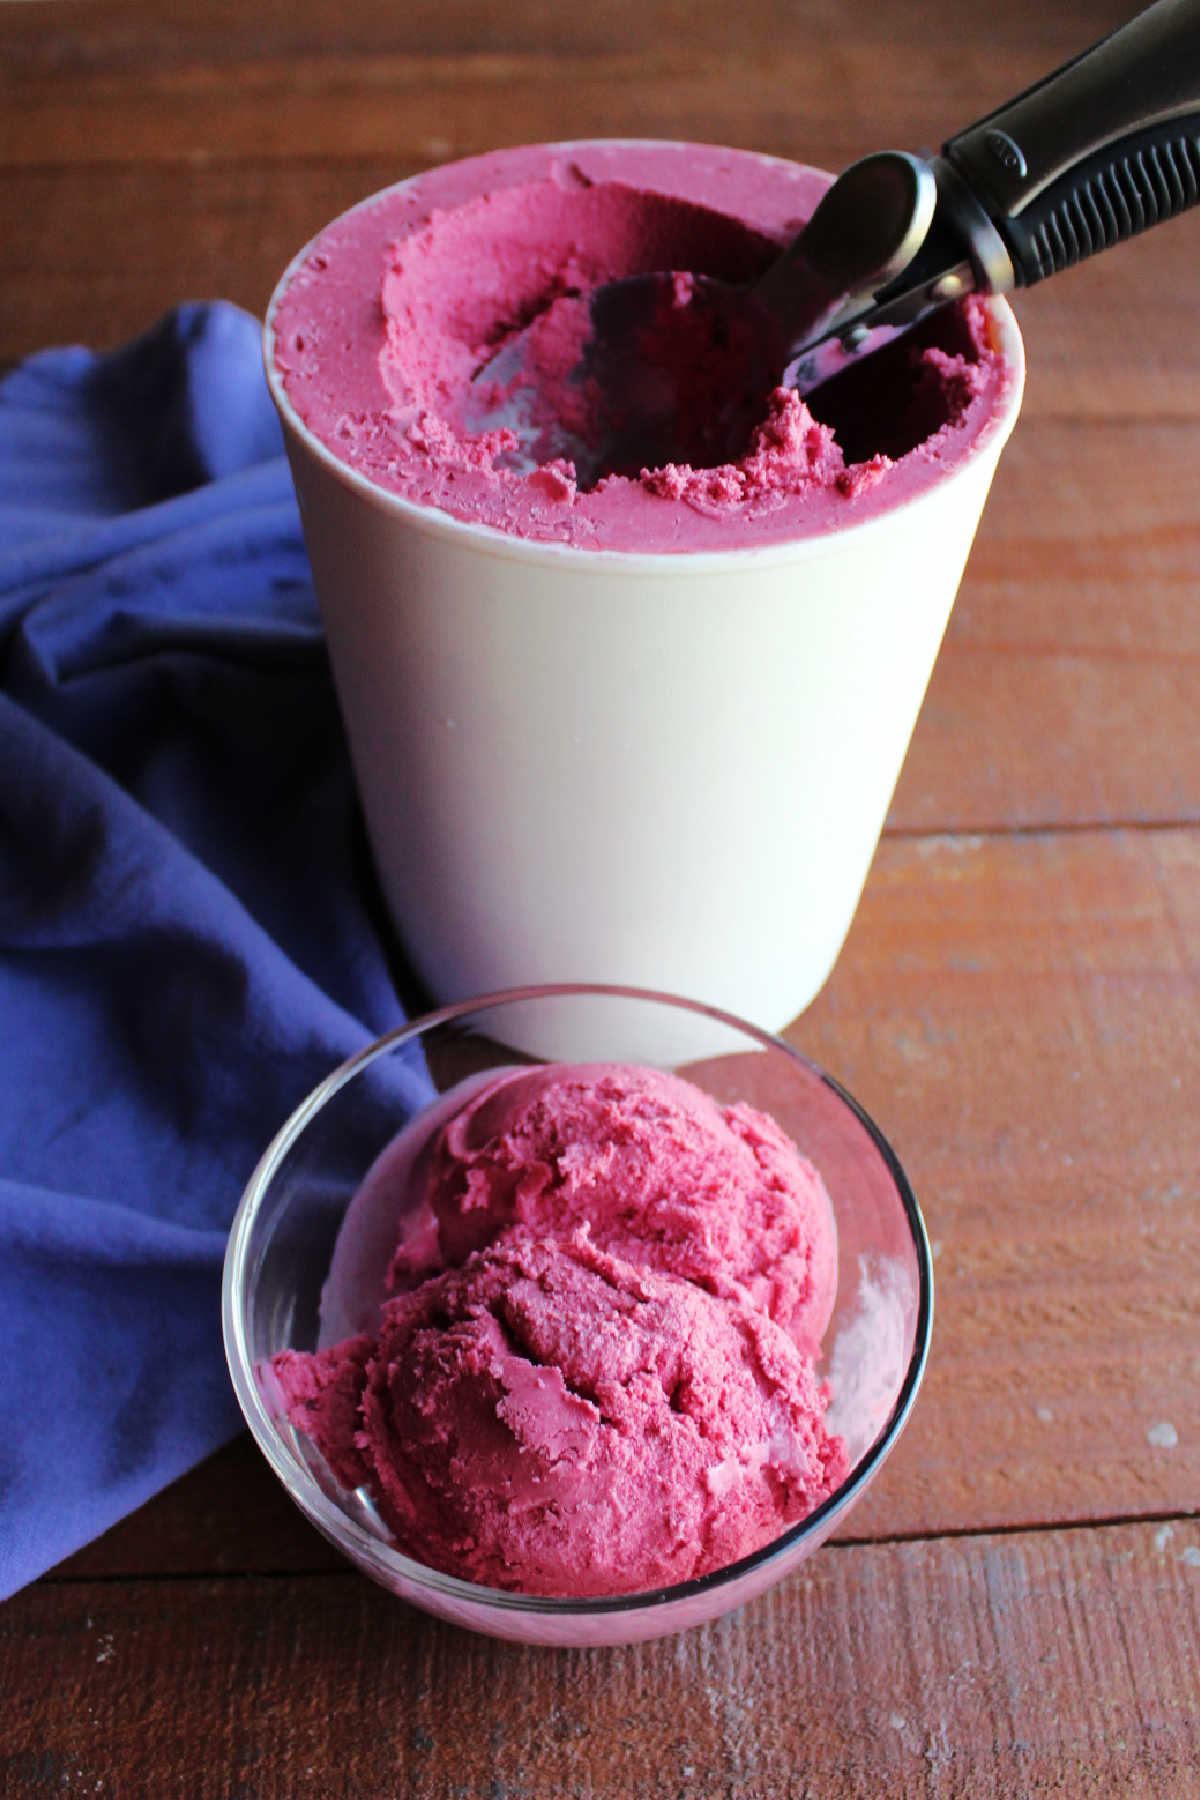 Scoops of vibrant blackberry ice cream in small glass bowl with larger container of homemade blackberry ice cream in the background.